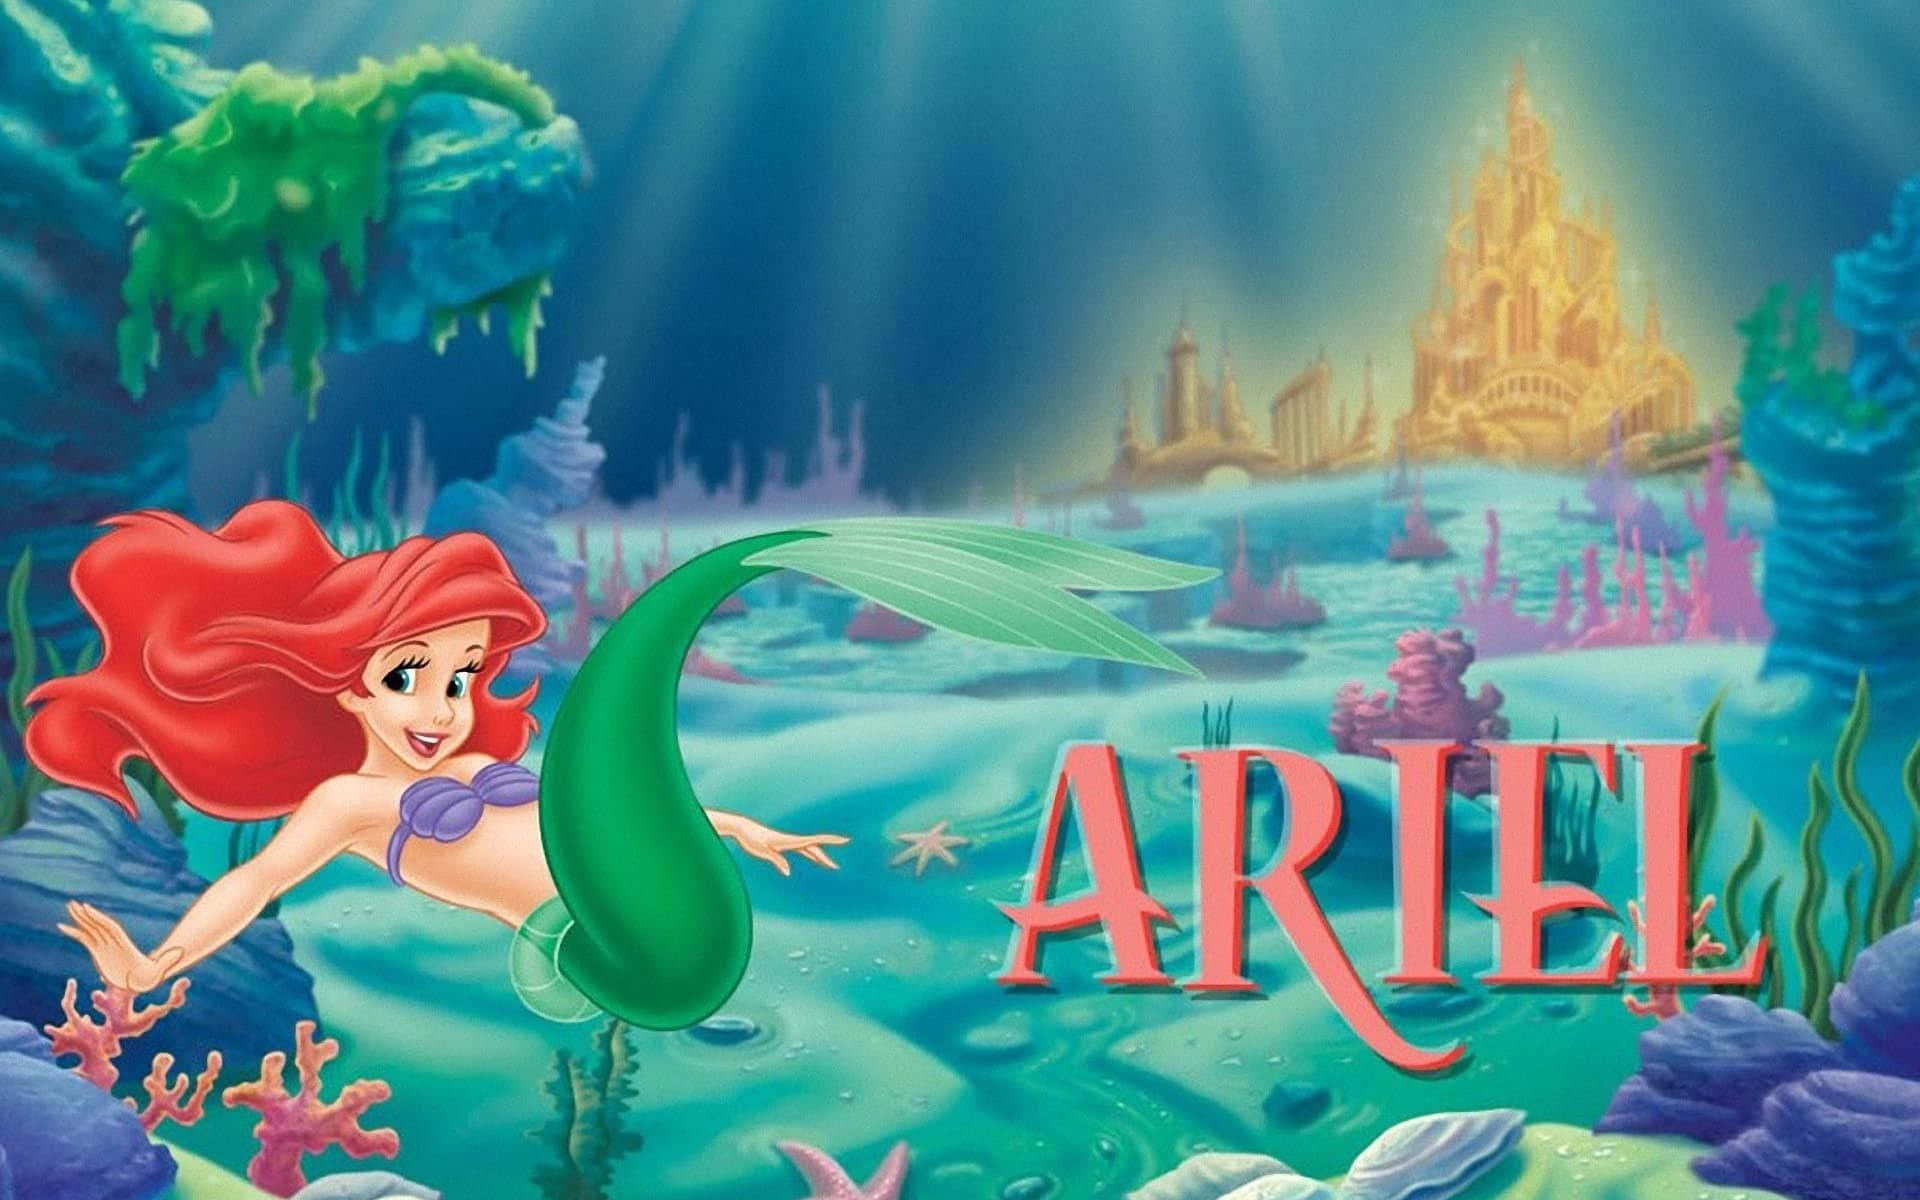 A close up view of Ariel, the Little Mermaid